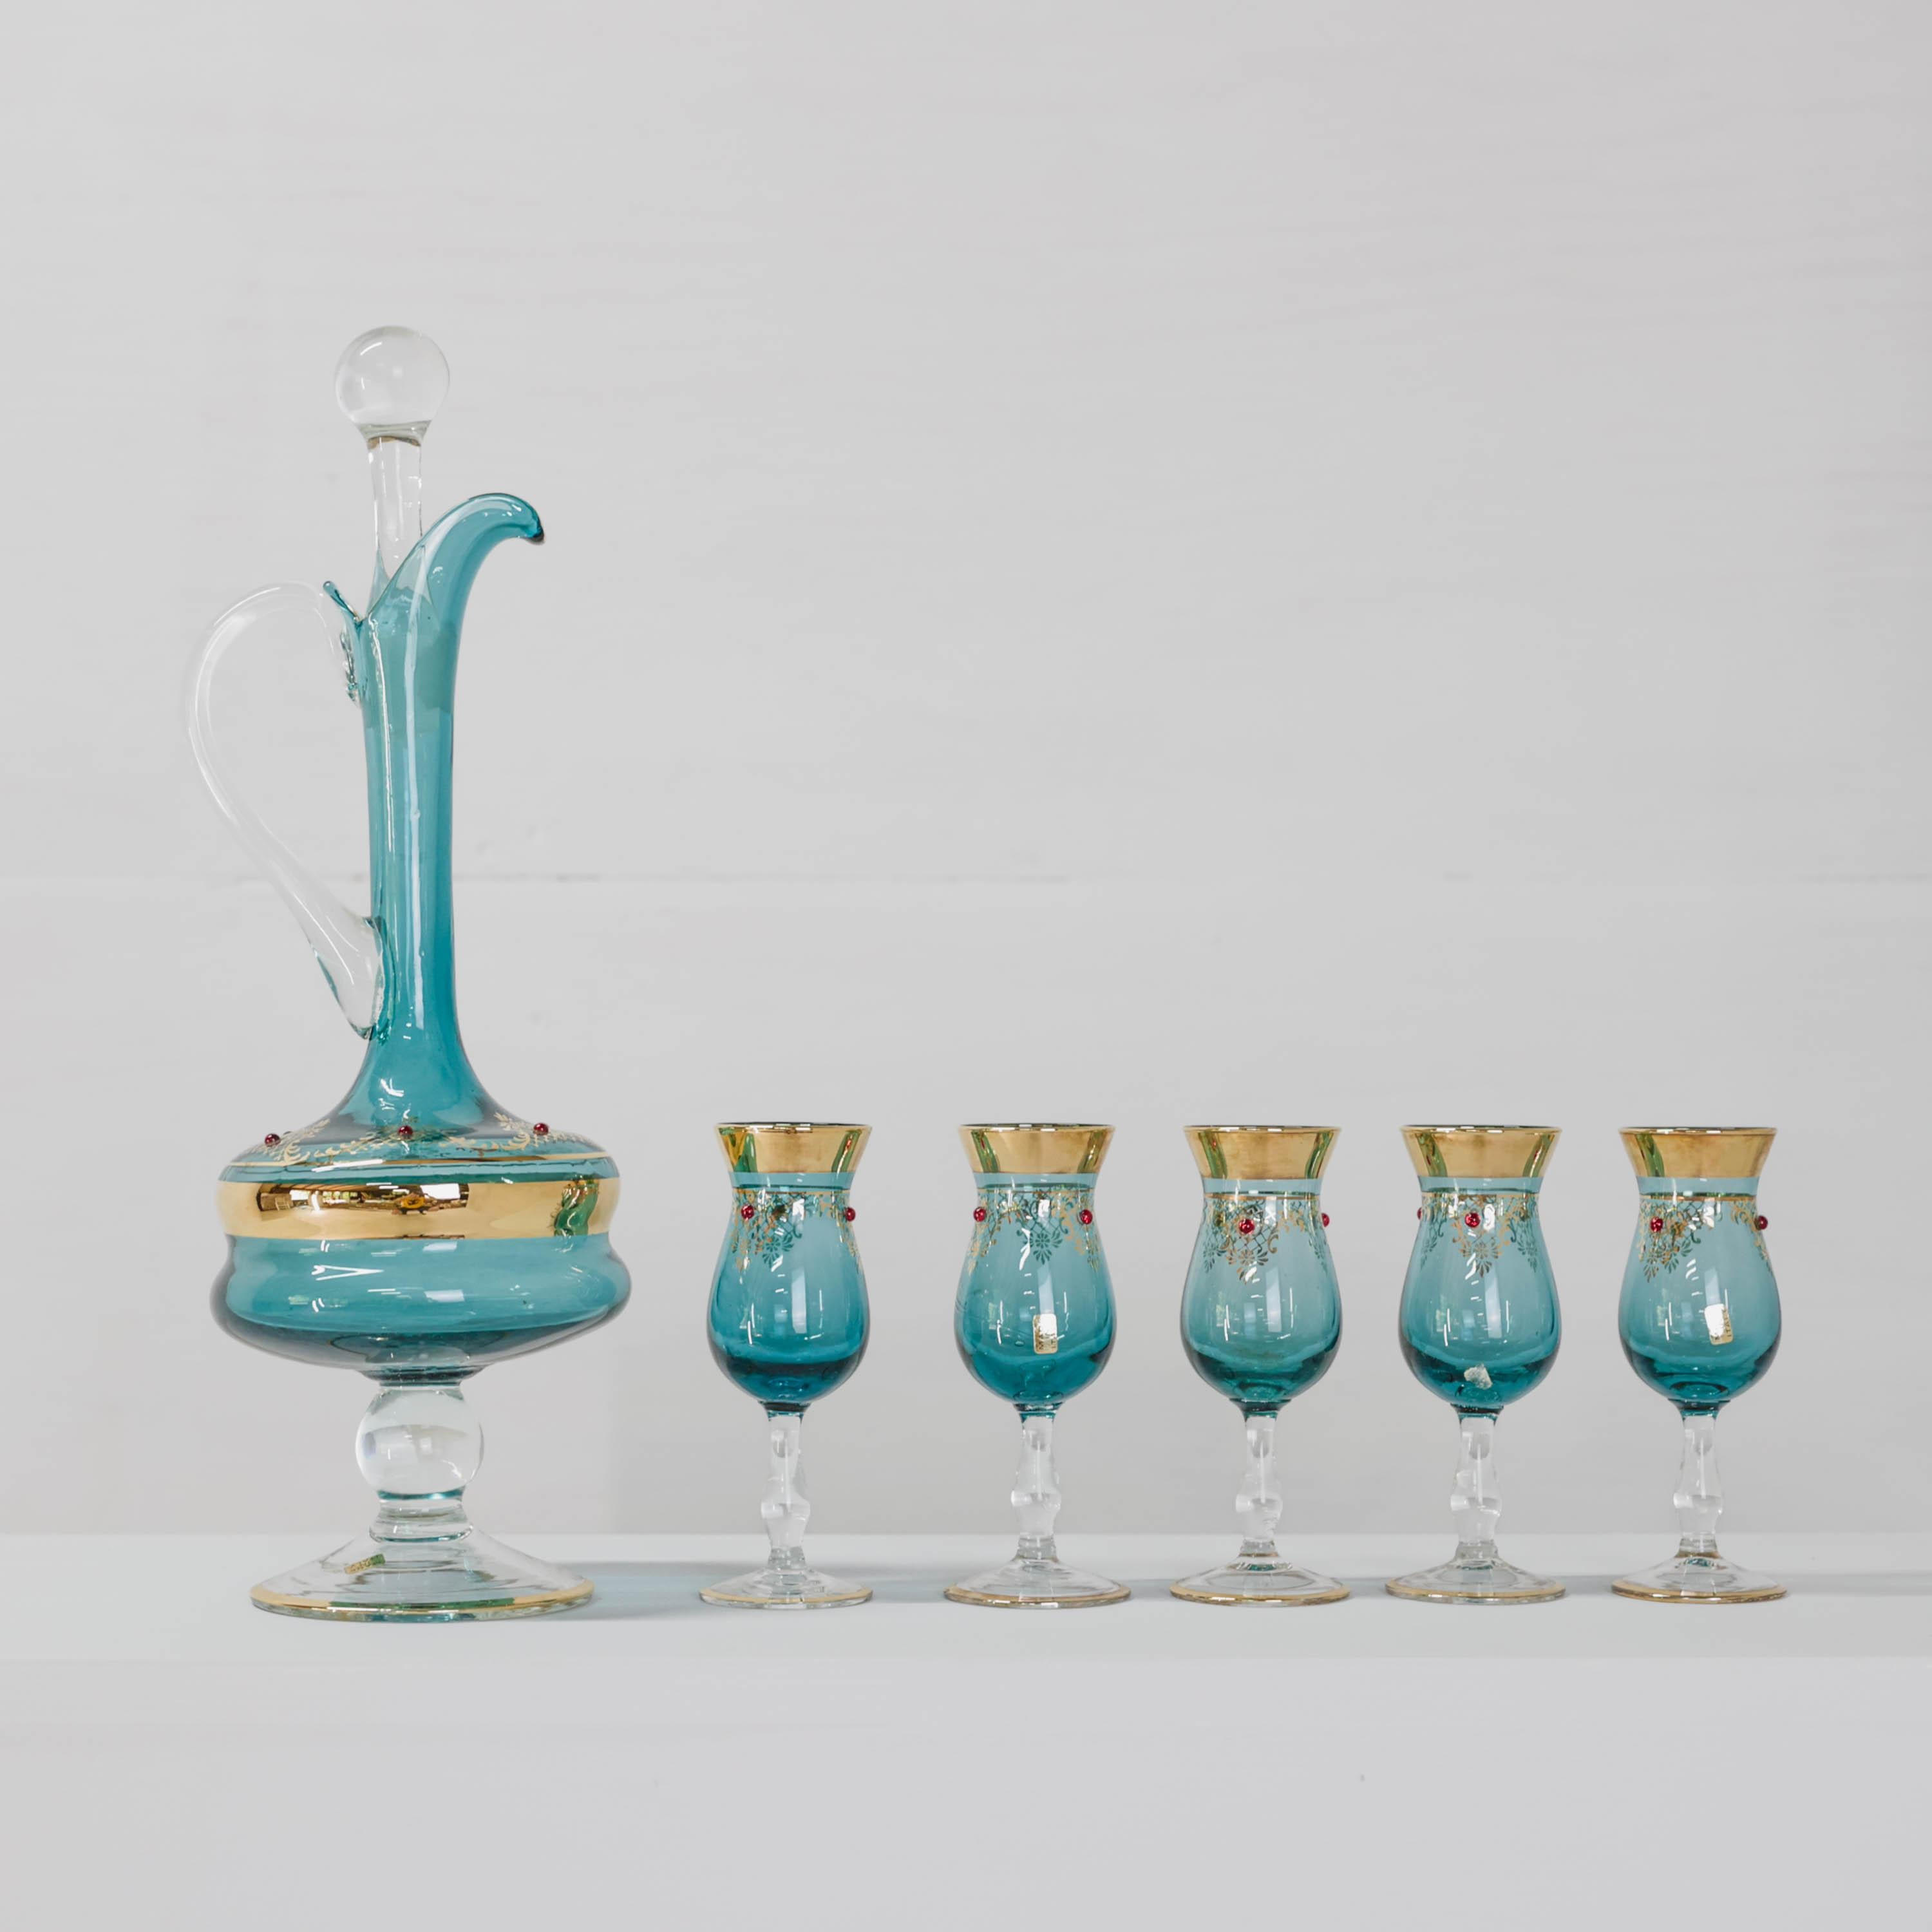 Gold Maximalist Midcentury Venetian Glass Decanter and Five Glasses, Never Used For Sale